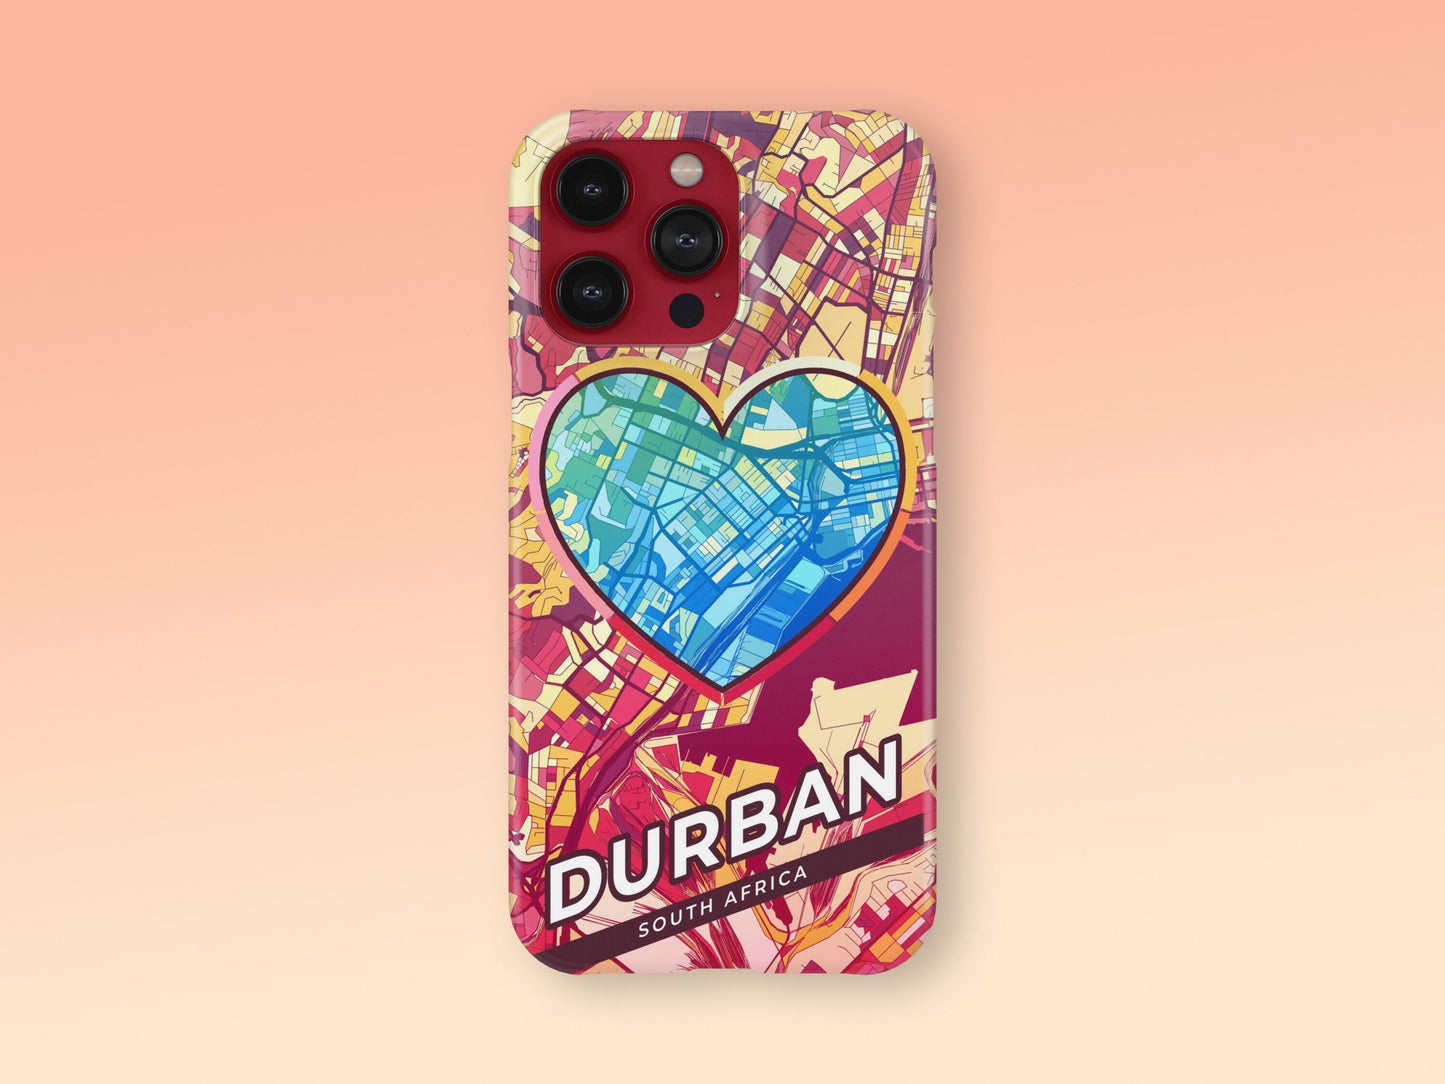 Durban South Africa slim phone case with colorful icon. Birthday, wedding or housewarming gift. Couple match cases. 2